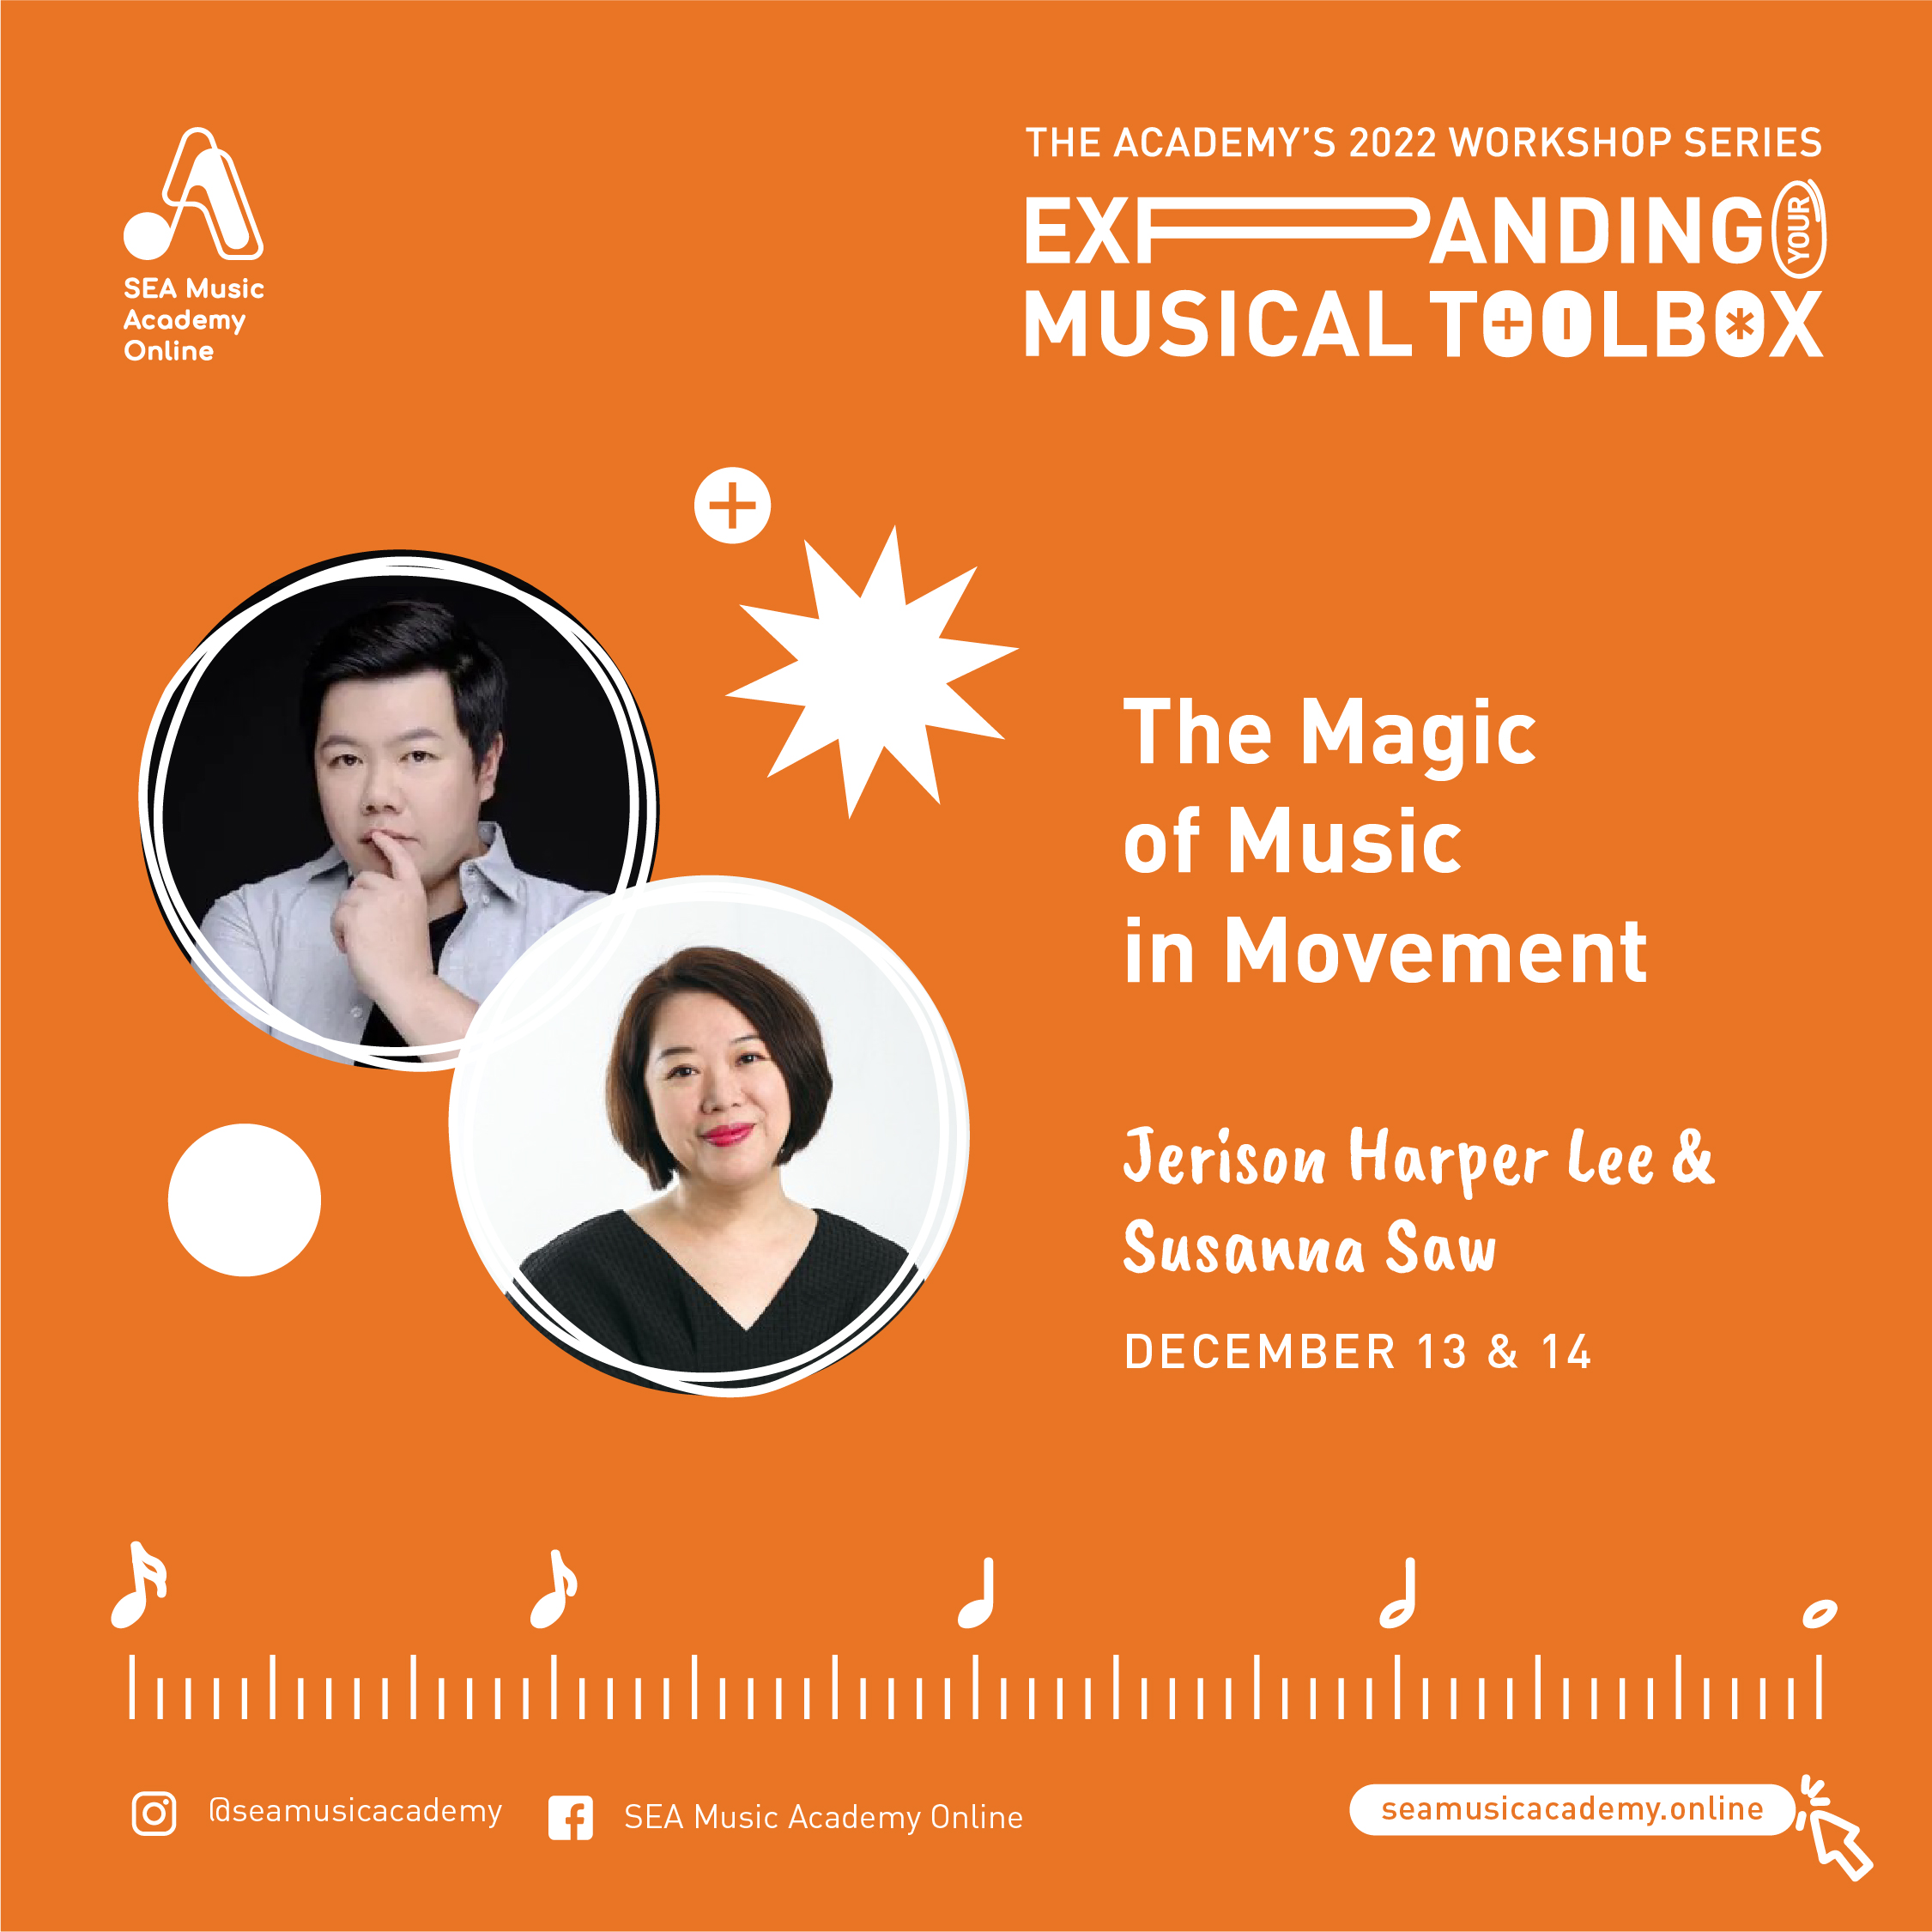 The Magic of Music in Movement